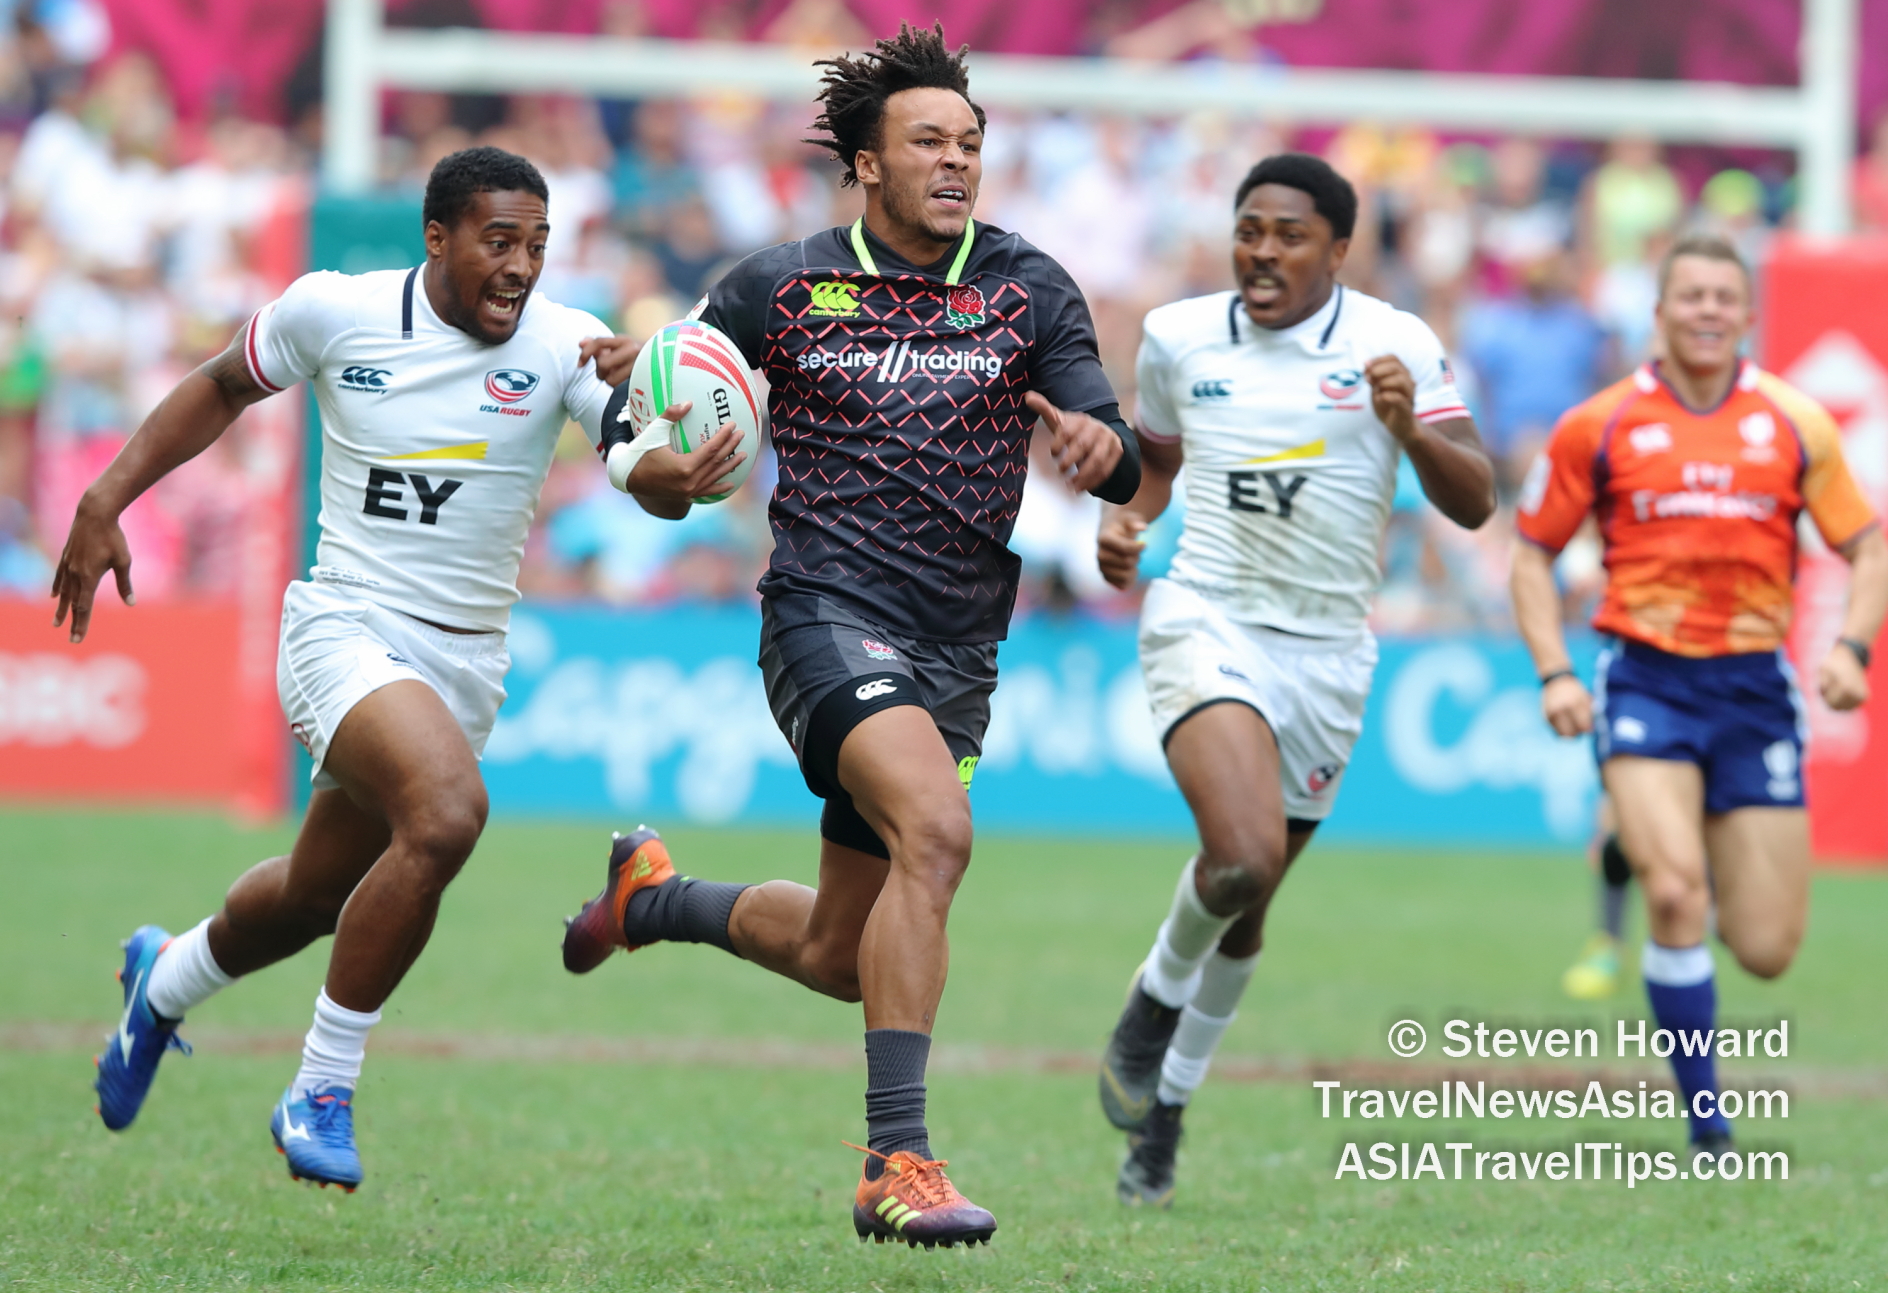 Action from the HK7s in 2019. Picture by Steven Howard of TravelNewsAsia.com Click to enlarge.